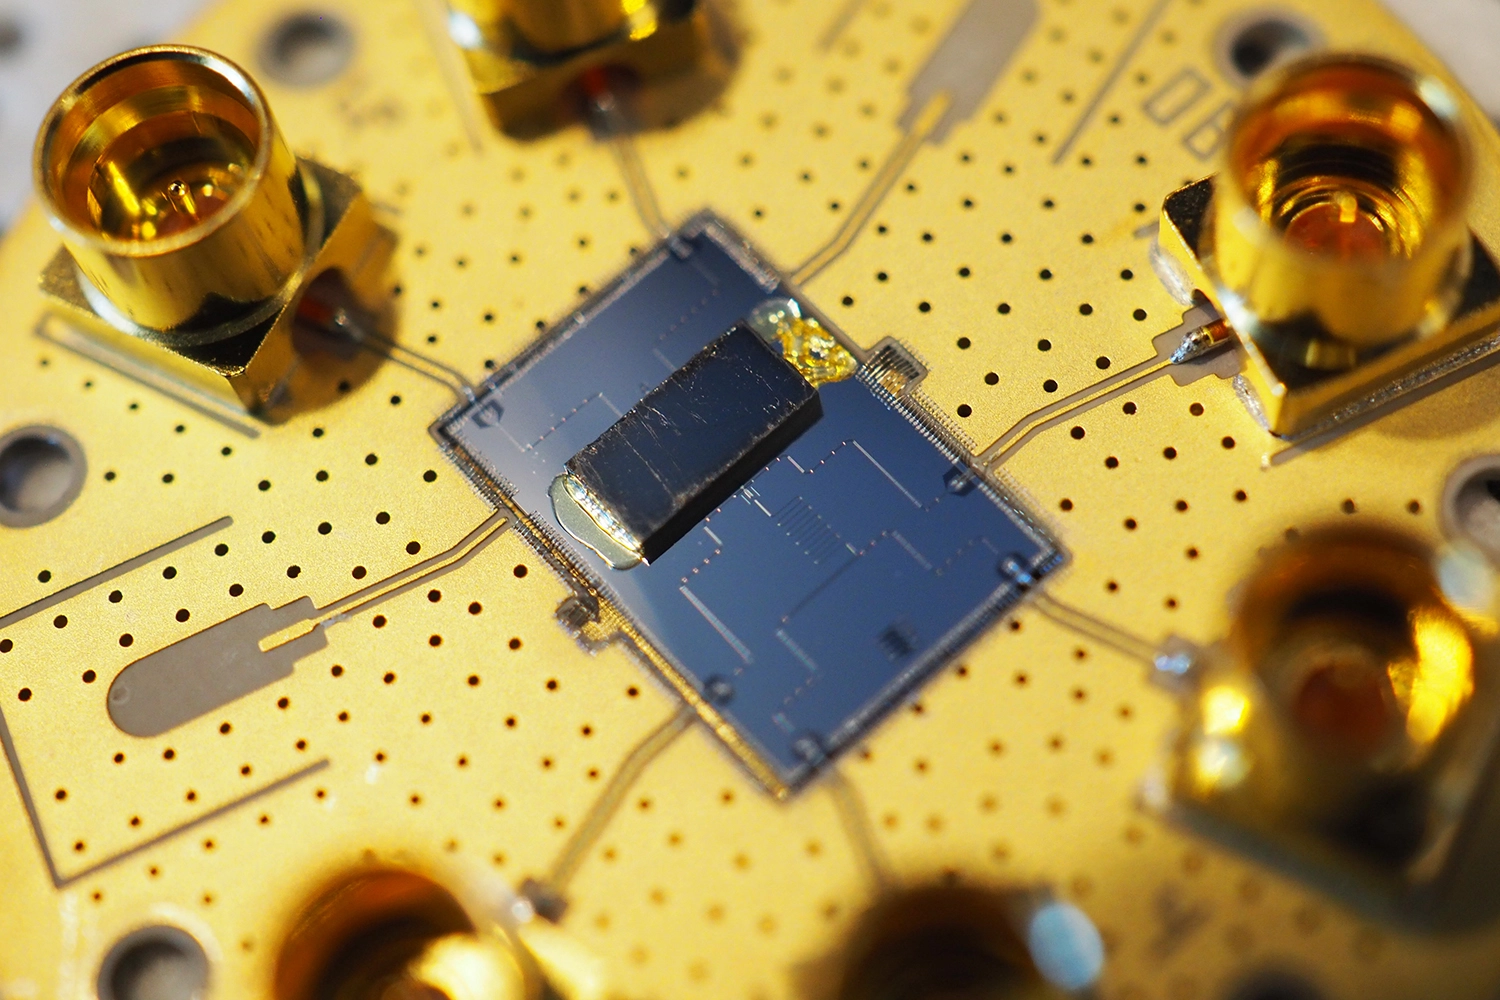 New Mechanical-Based Quantum Hardware Is Made Possible By Stanford Researchers